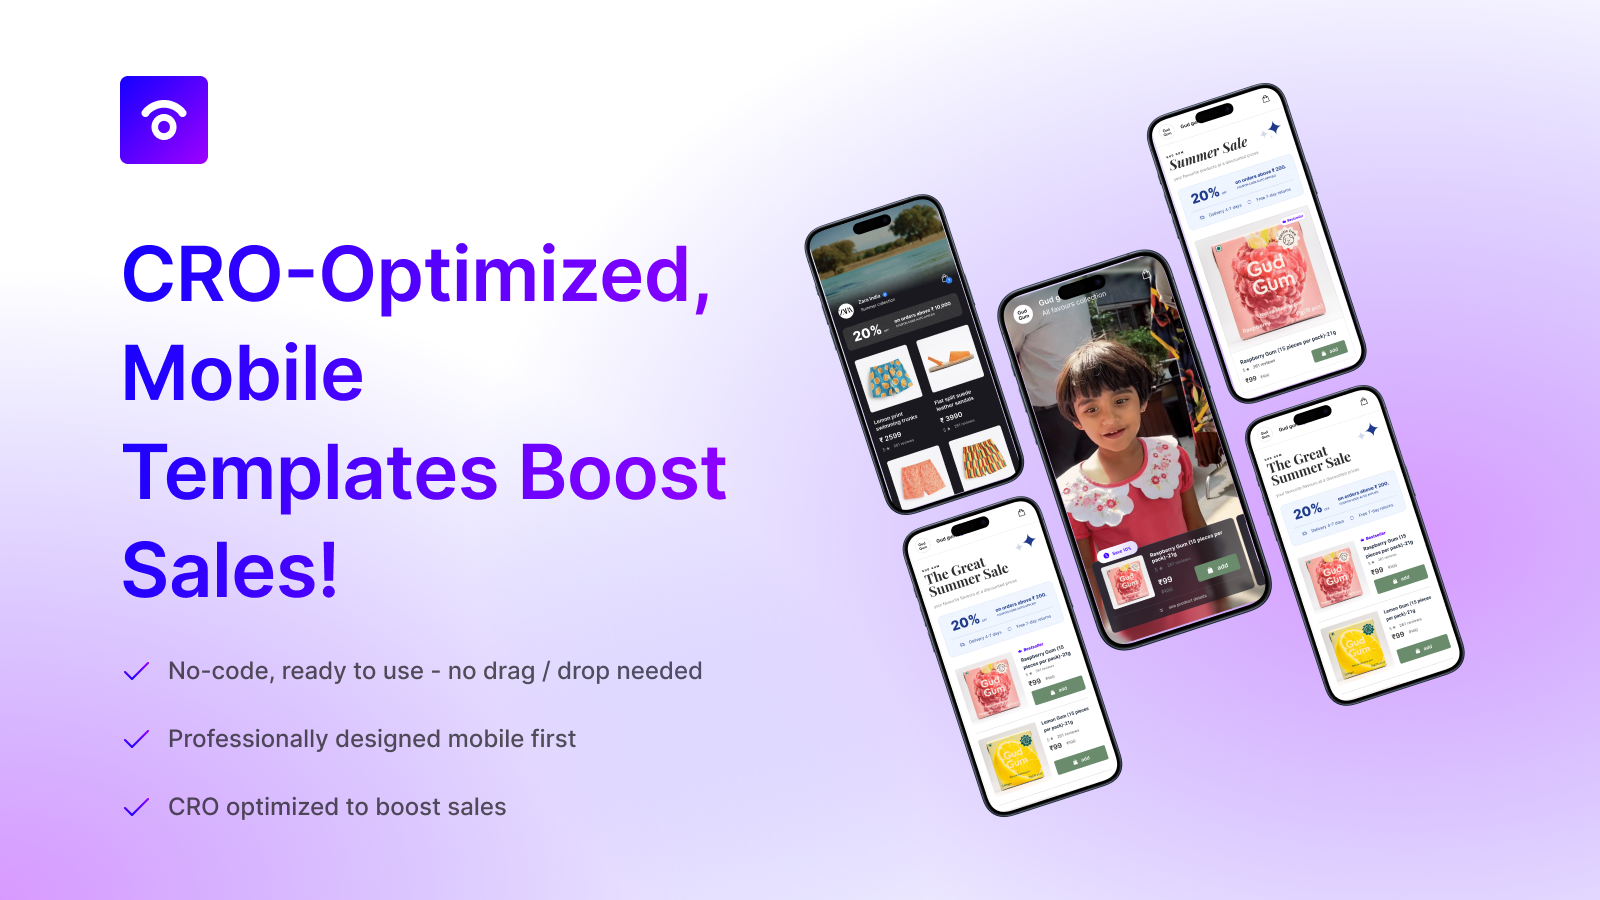 Mobile optimized Templates: Ready-to-Use, CRO-Optimized, No code